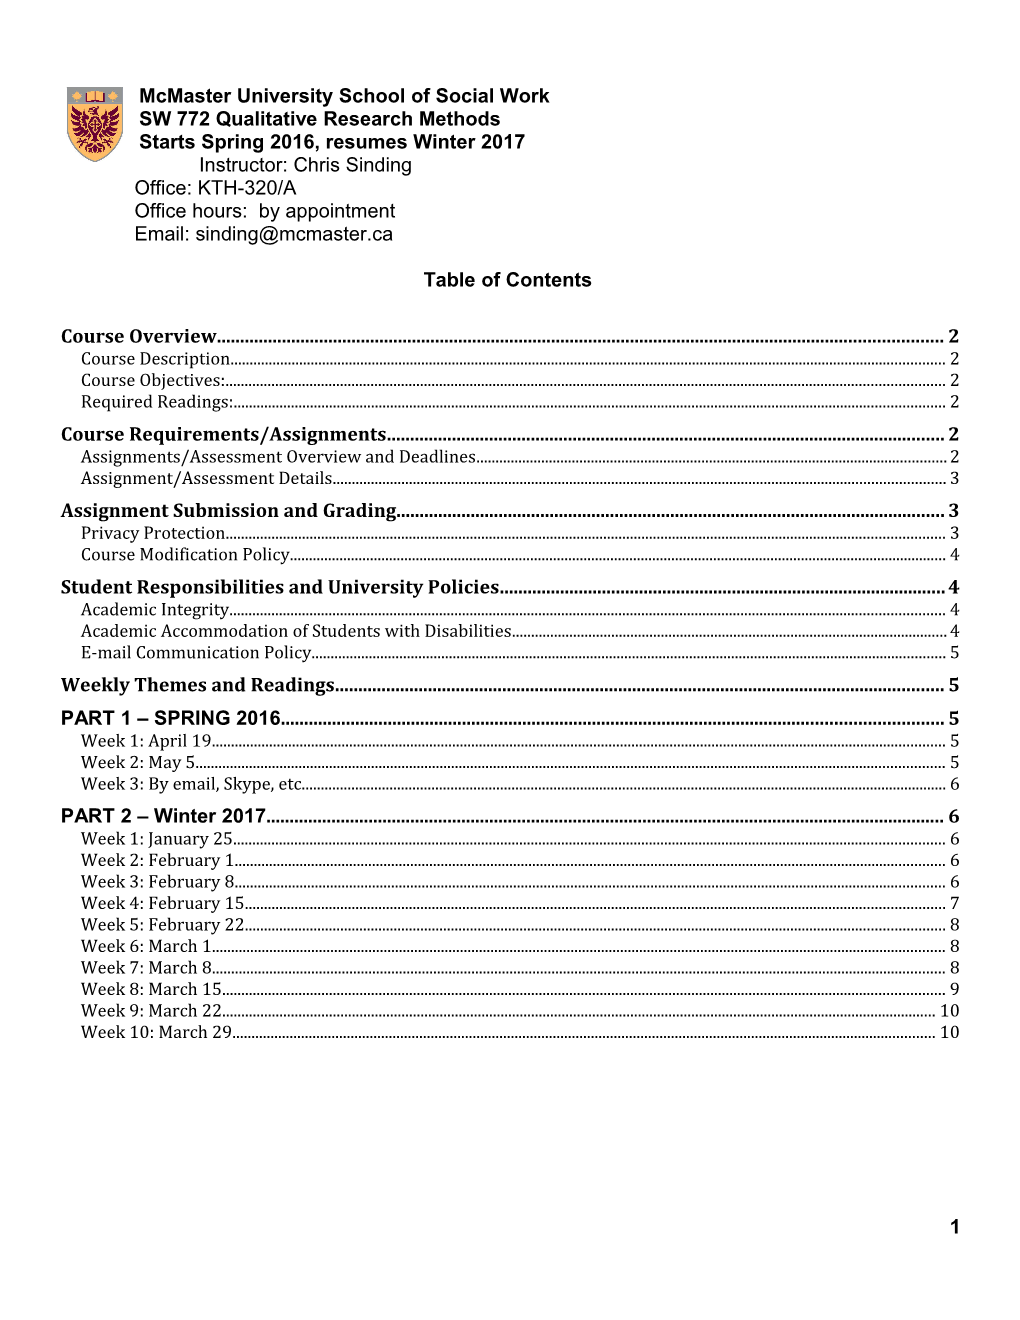 Accessible Course Outline Template